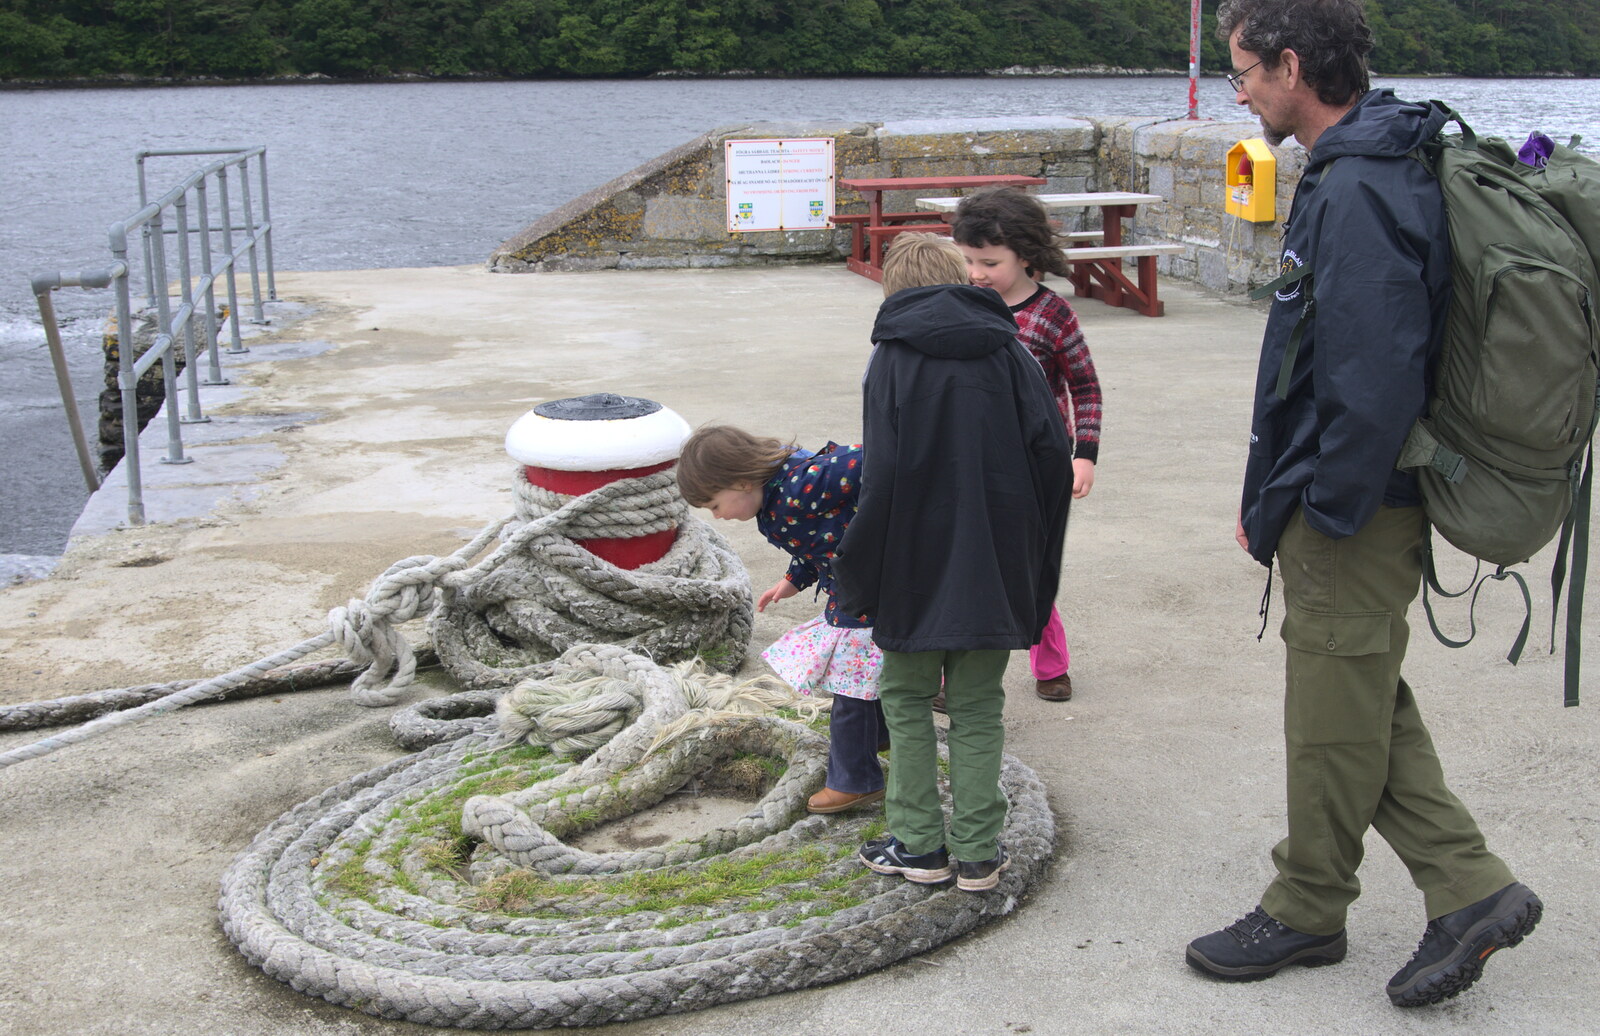 Fred and the others explore an old rope from A Seafari Boat Trip, Kenmare, Kerry, Ireland - 3rd August 2017